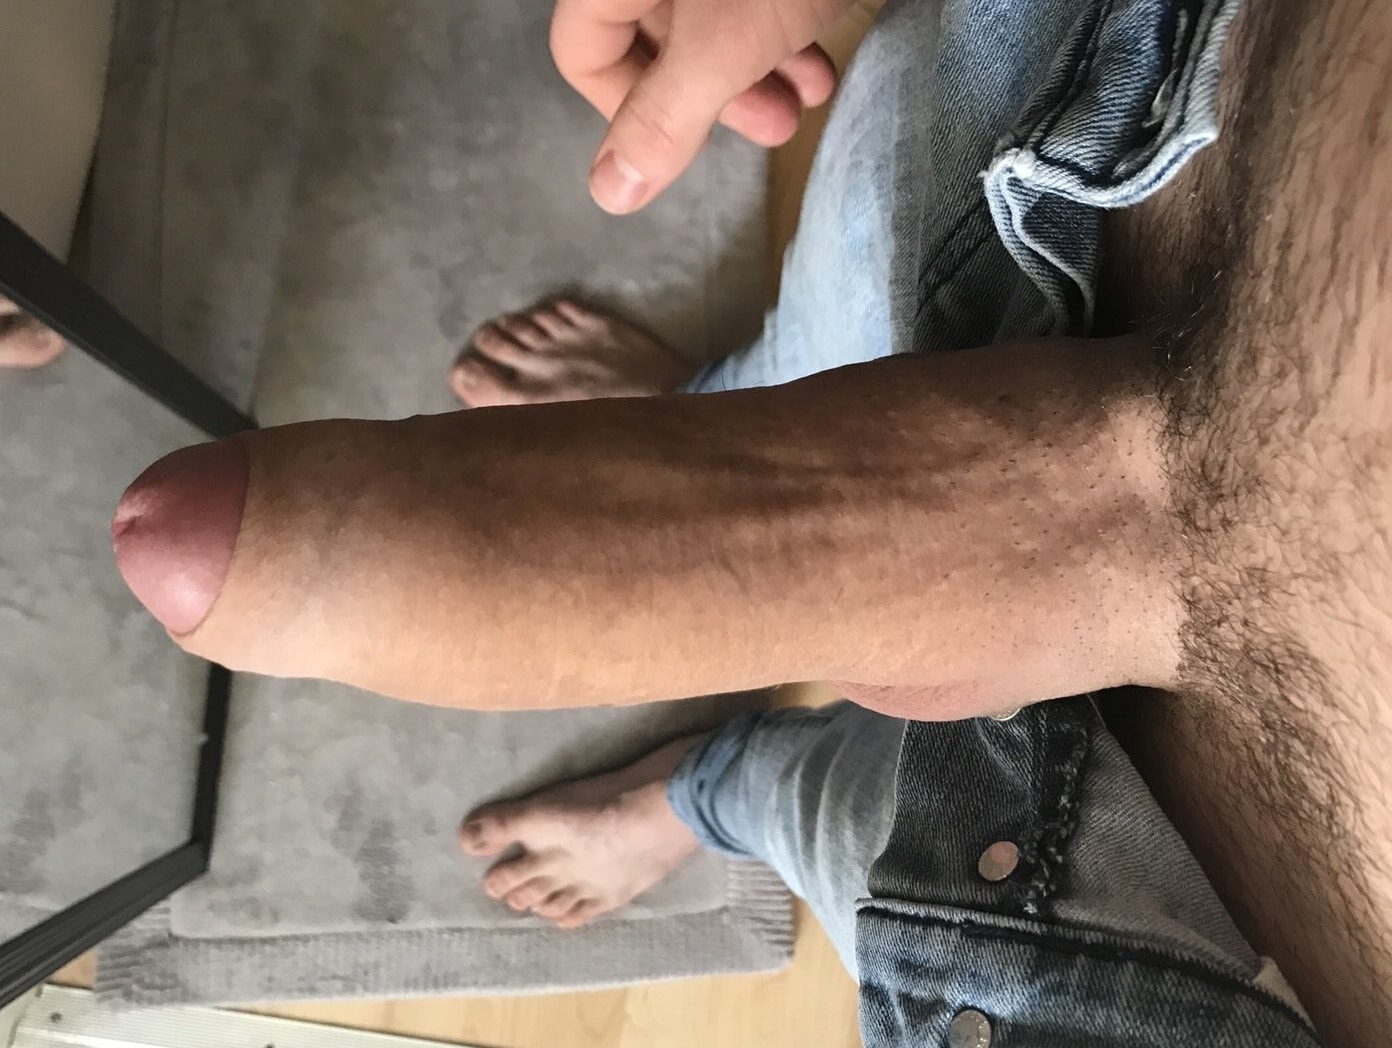 Amateurs with hard cocks hq nude picture